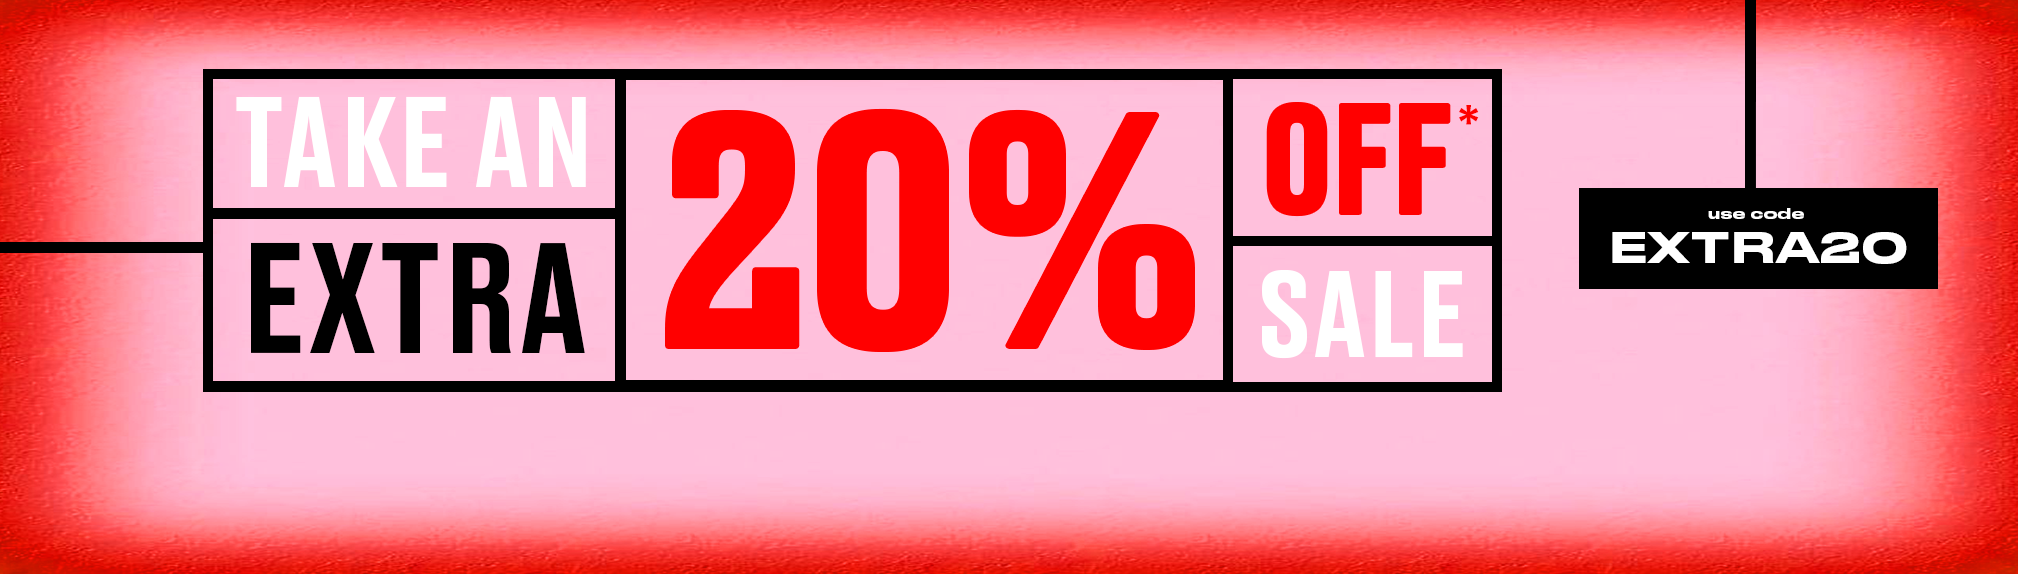 Save An Extra 20% Off Sale* Use Code: EXTRA20